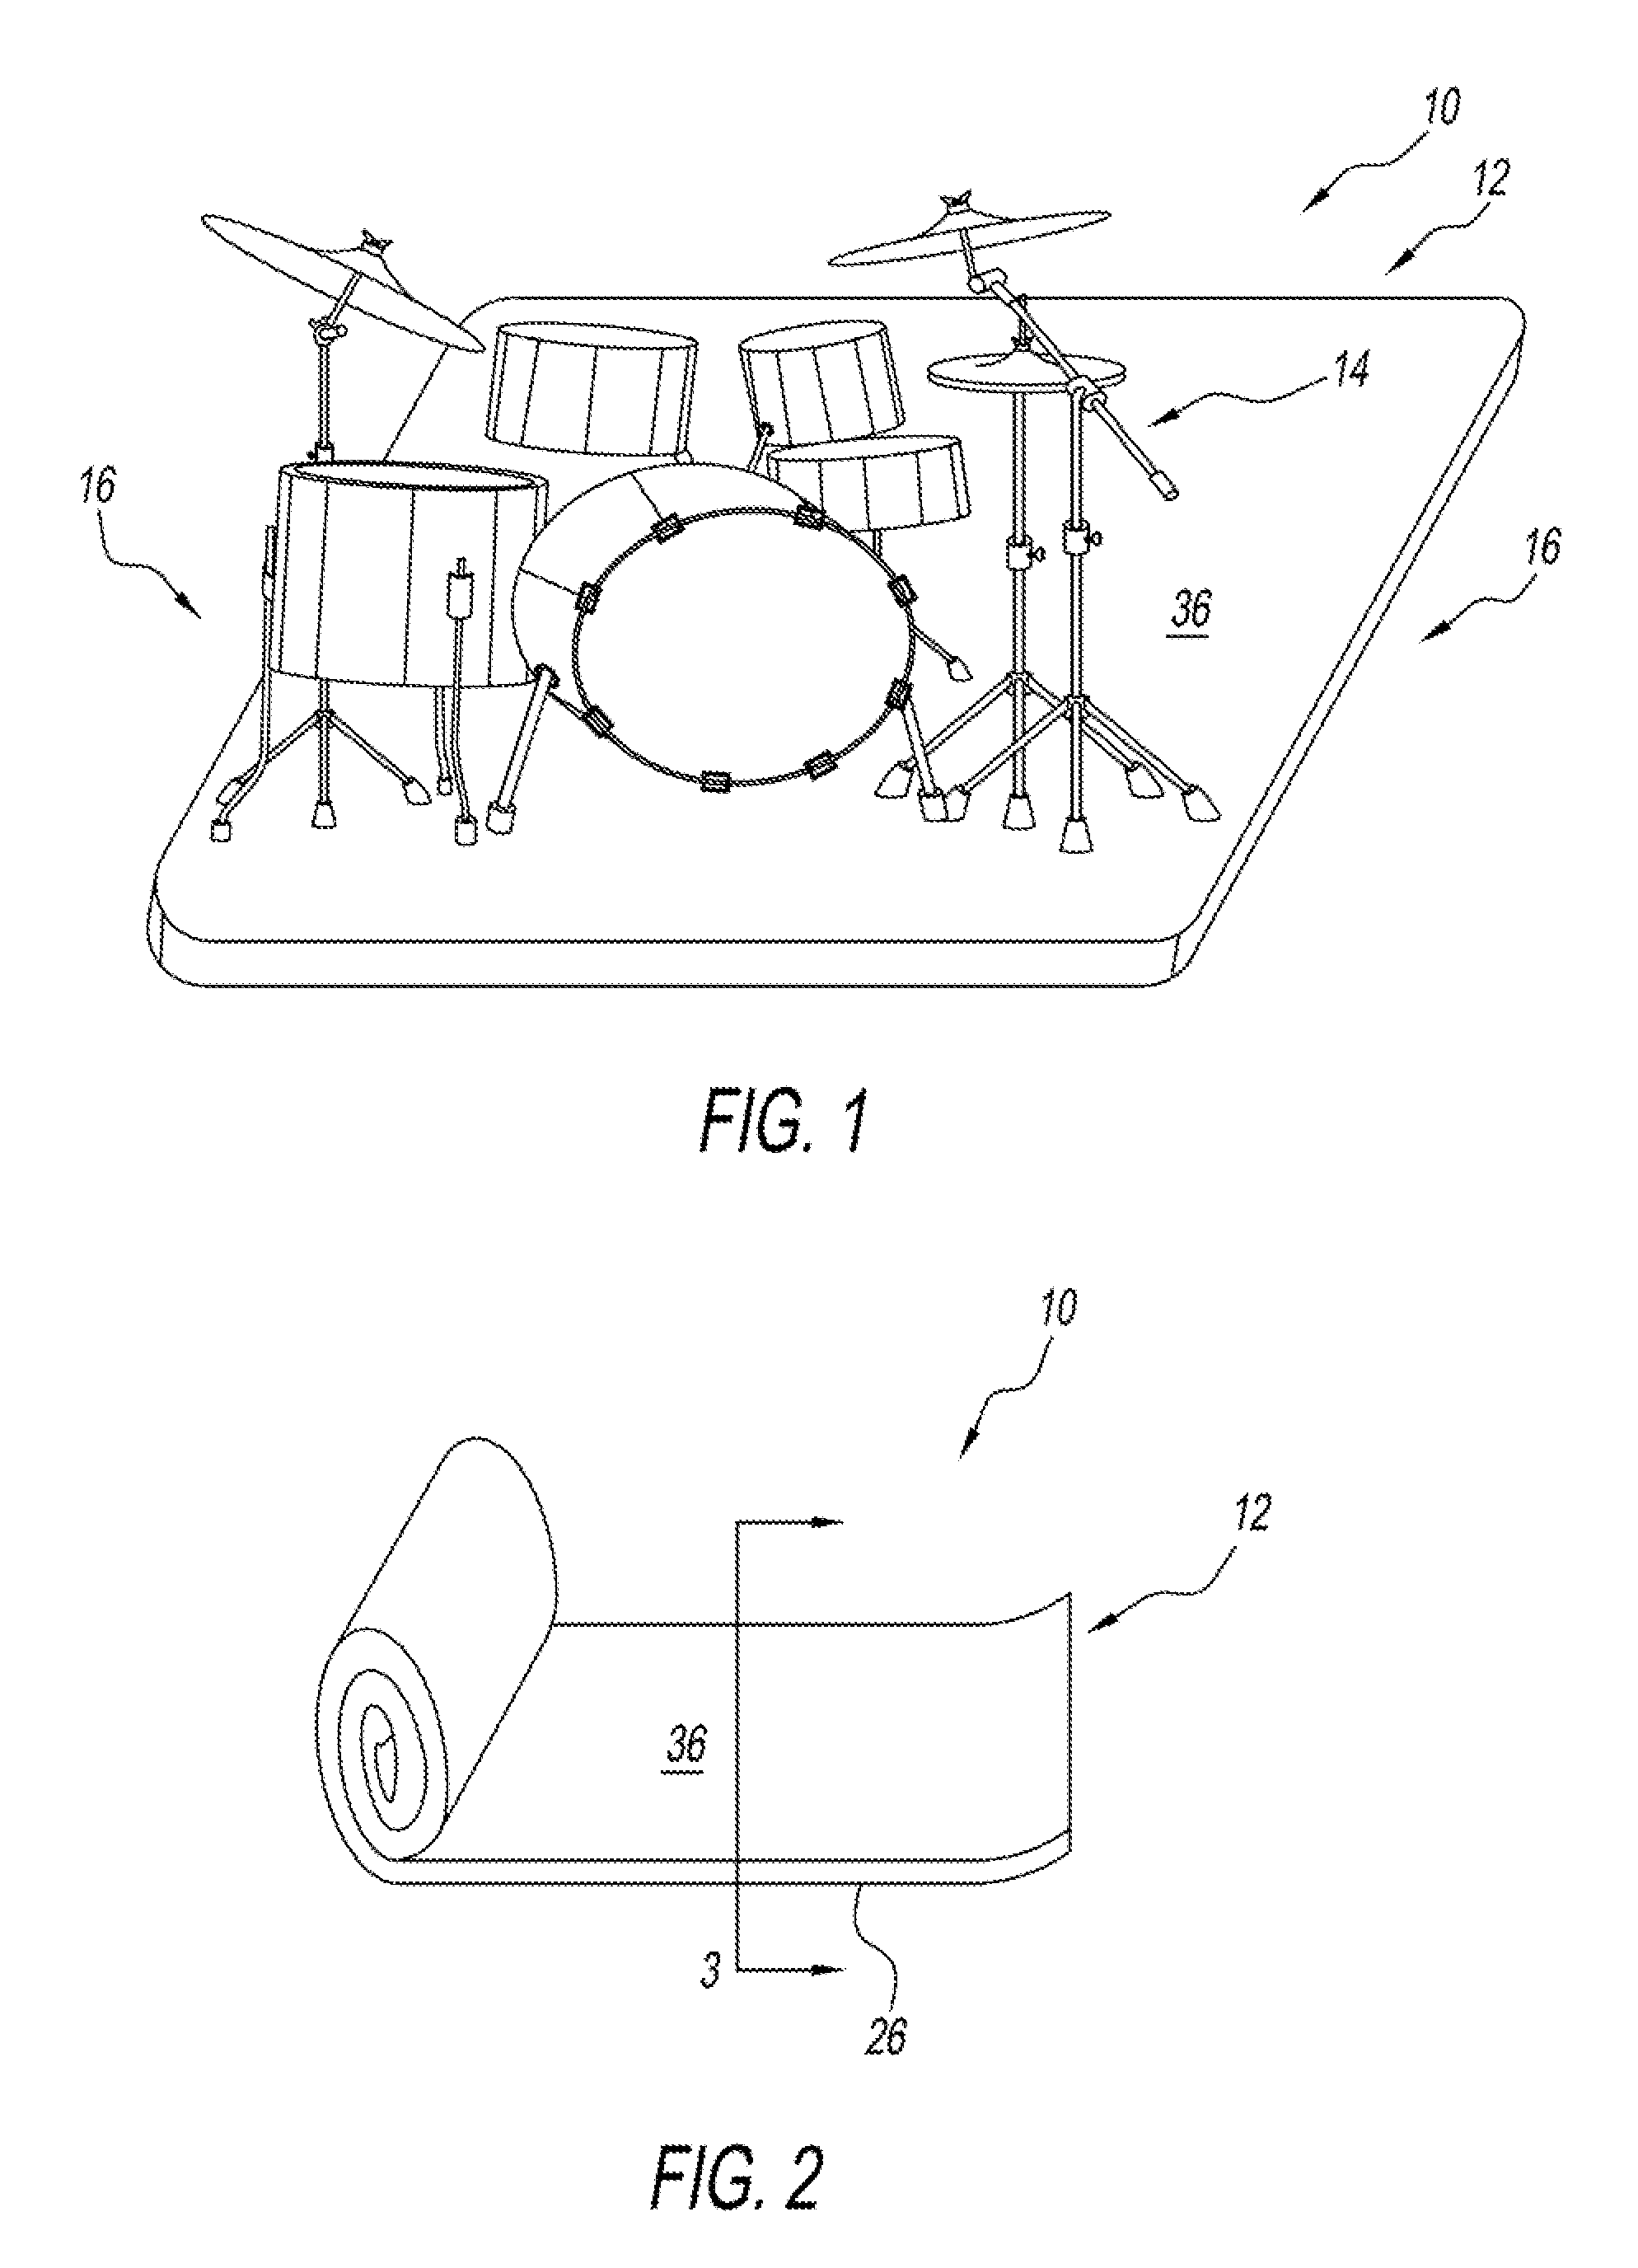 Isolation and barrier type sound treatment devices